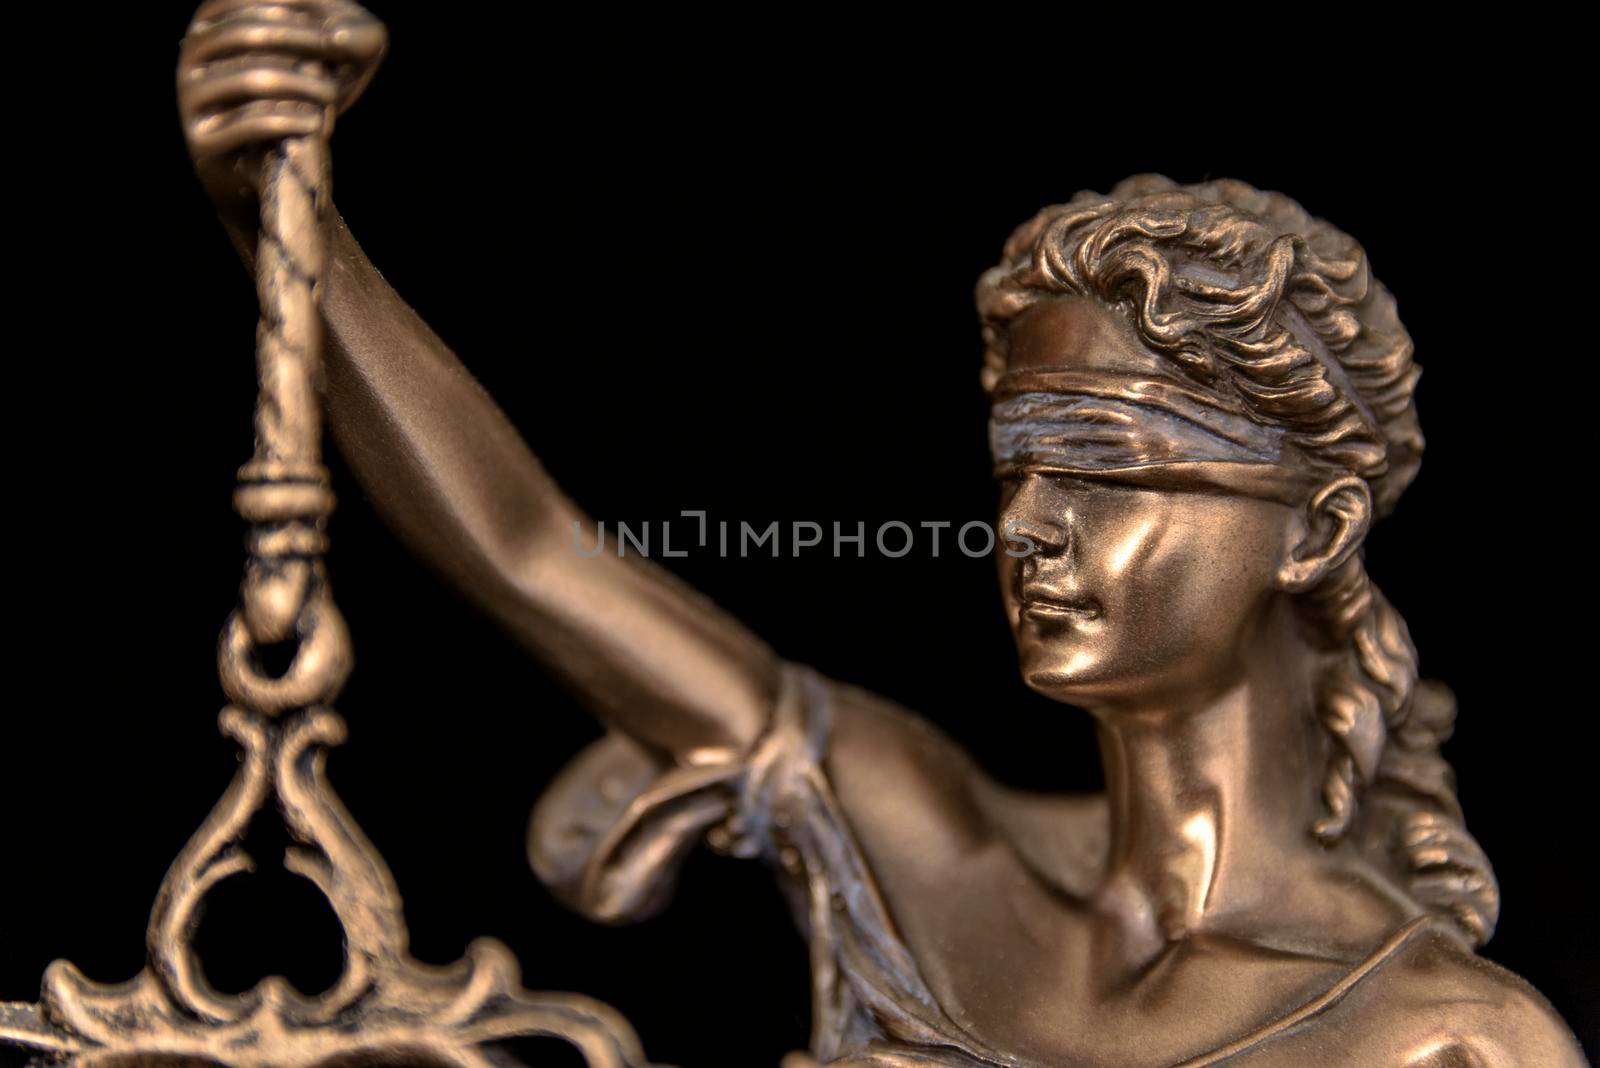 The Statue of Justice - lady justice or Iustitia Justitia the Roman goddess of Justice. by jbruiz78